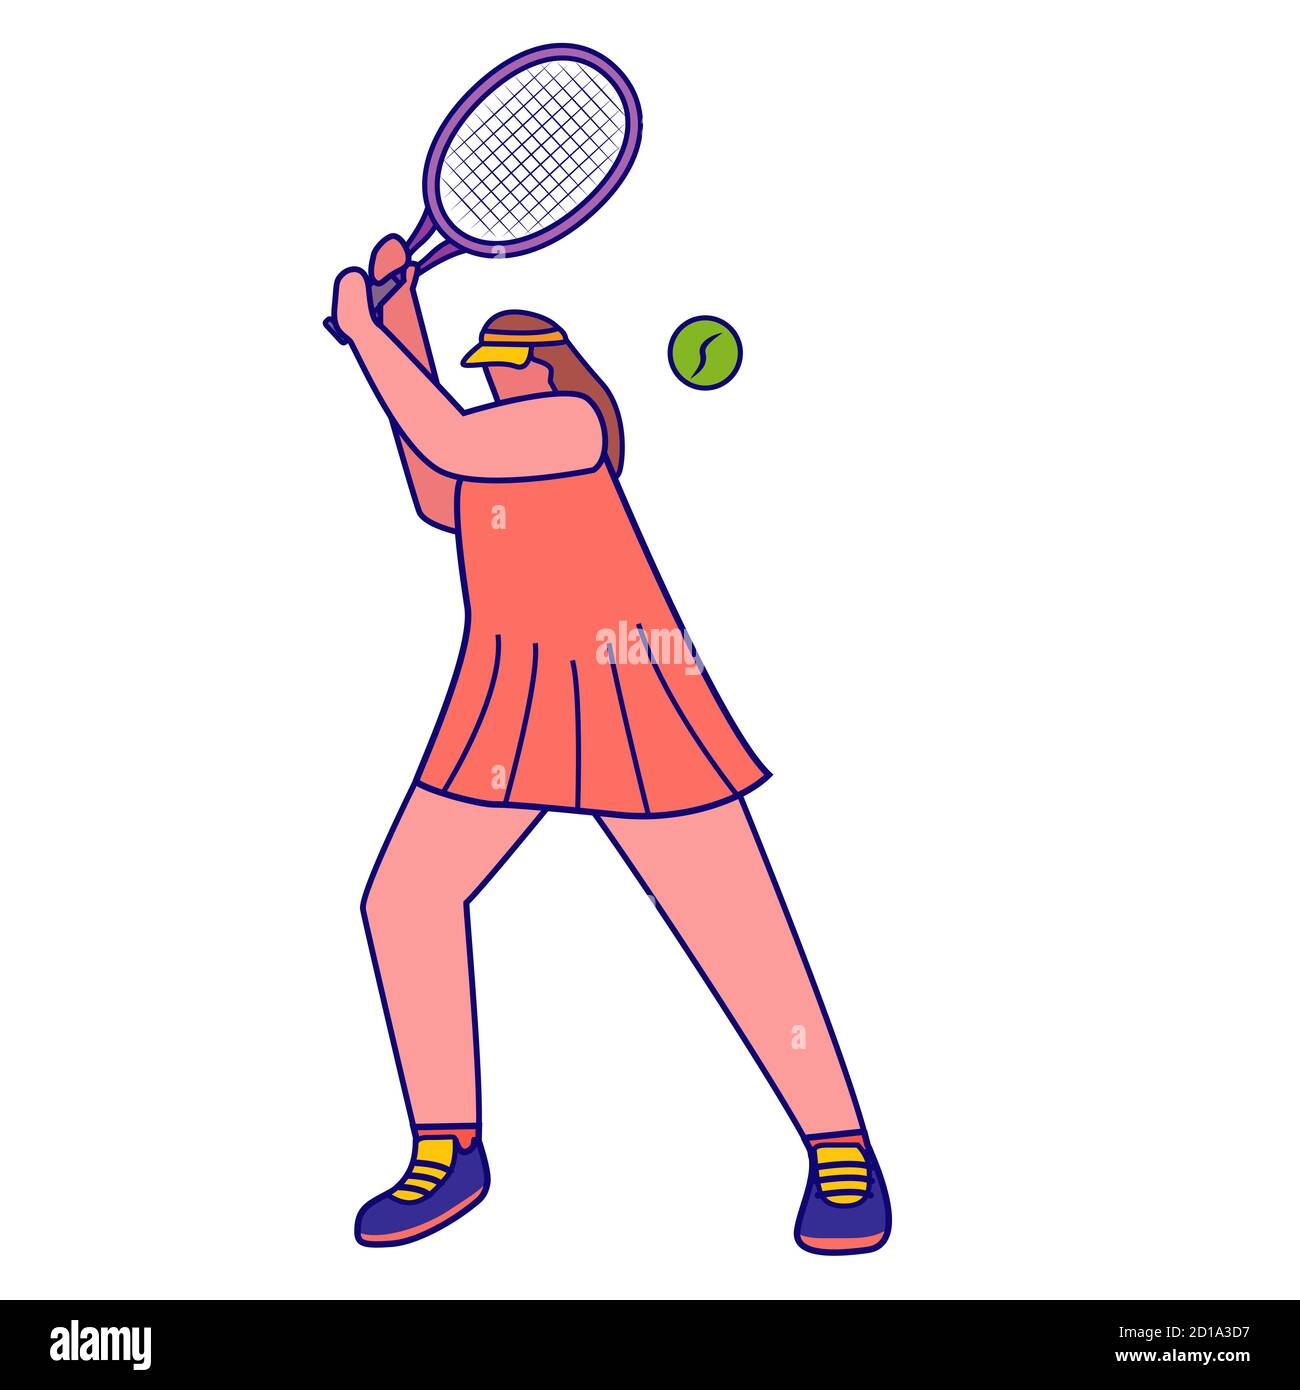 Woman tennis player with a racket.Female athlete hand drawn vector illustration. Stock Vector